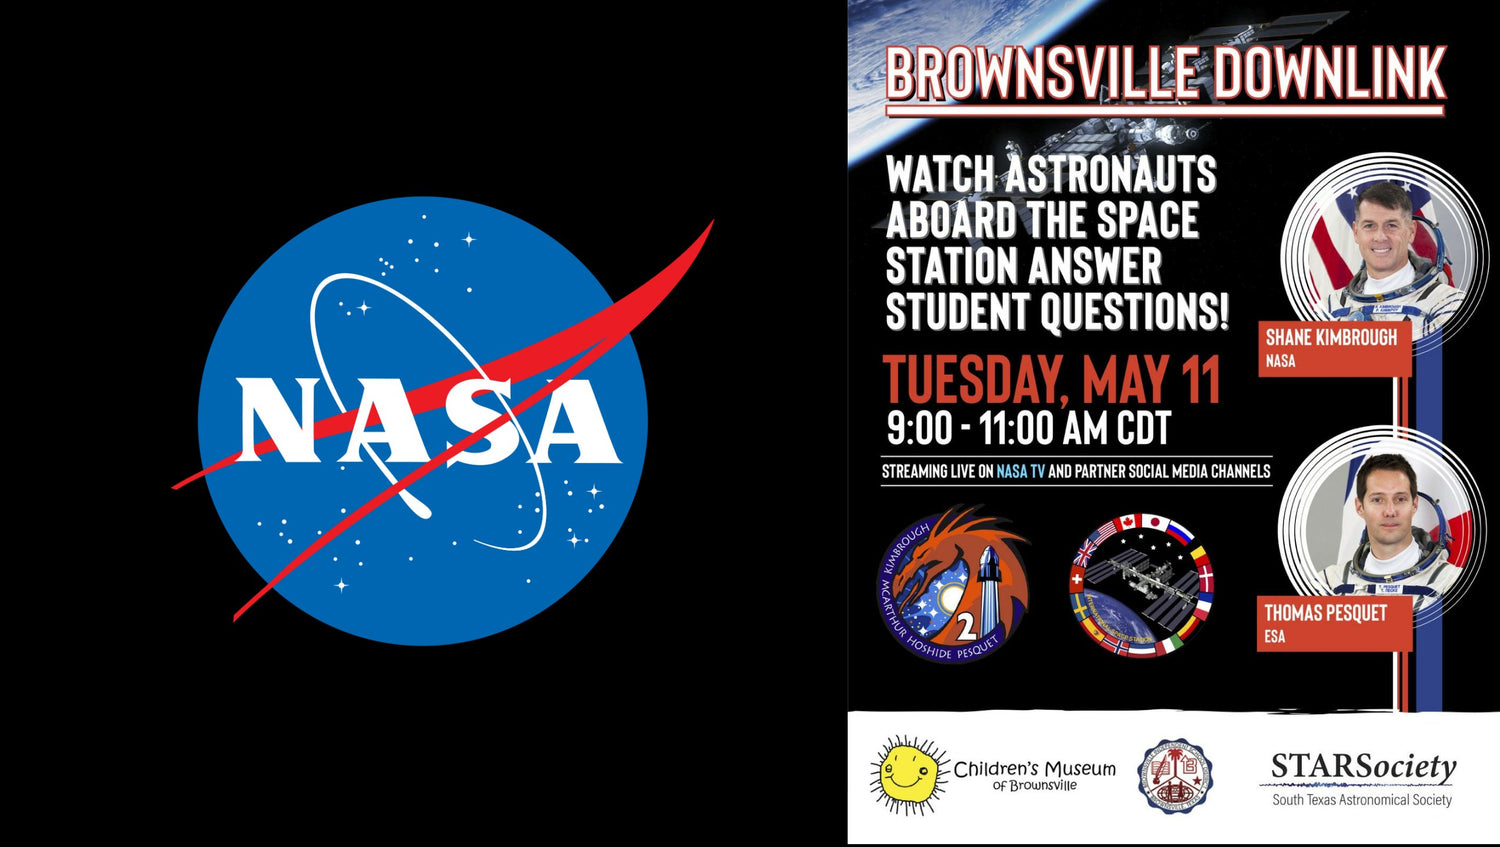 SpaceX Crew-2 Astronauts At The Space Station Will Answer Brownsville Texas Students Questions